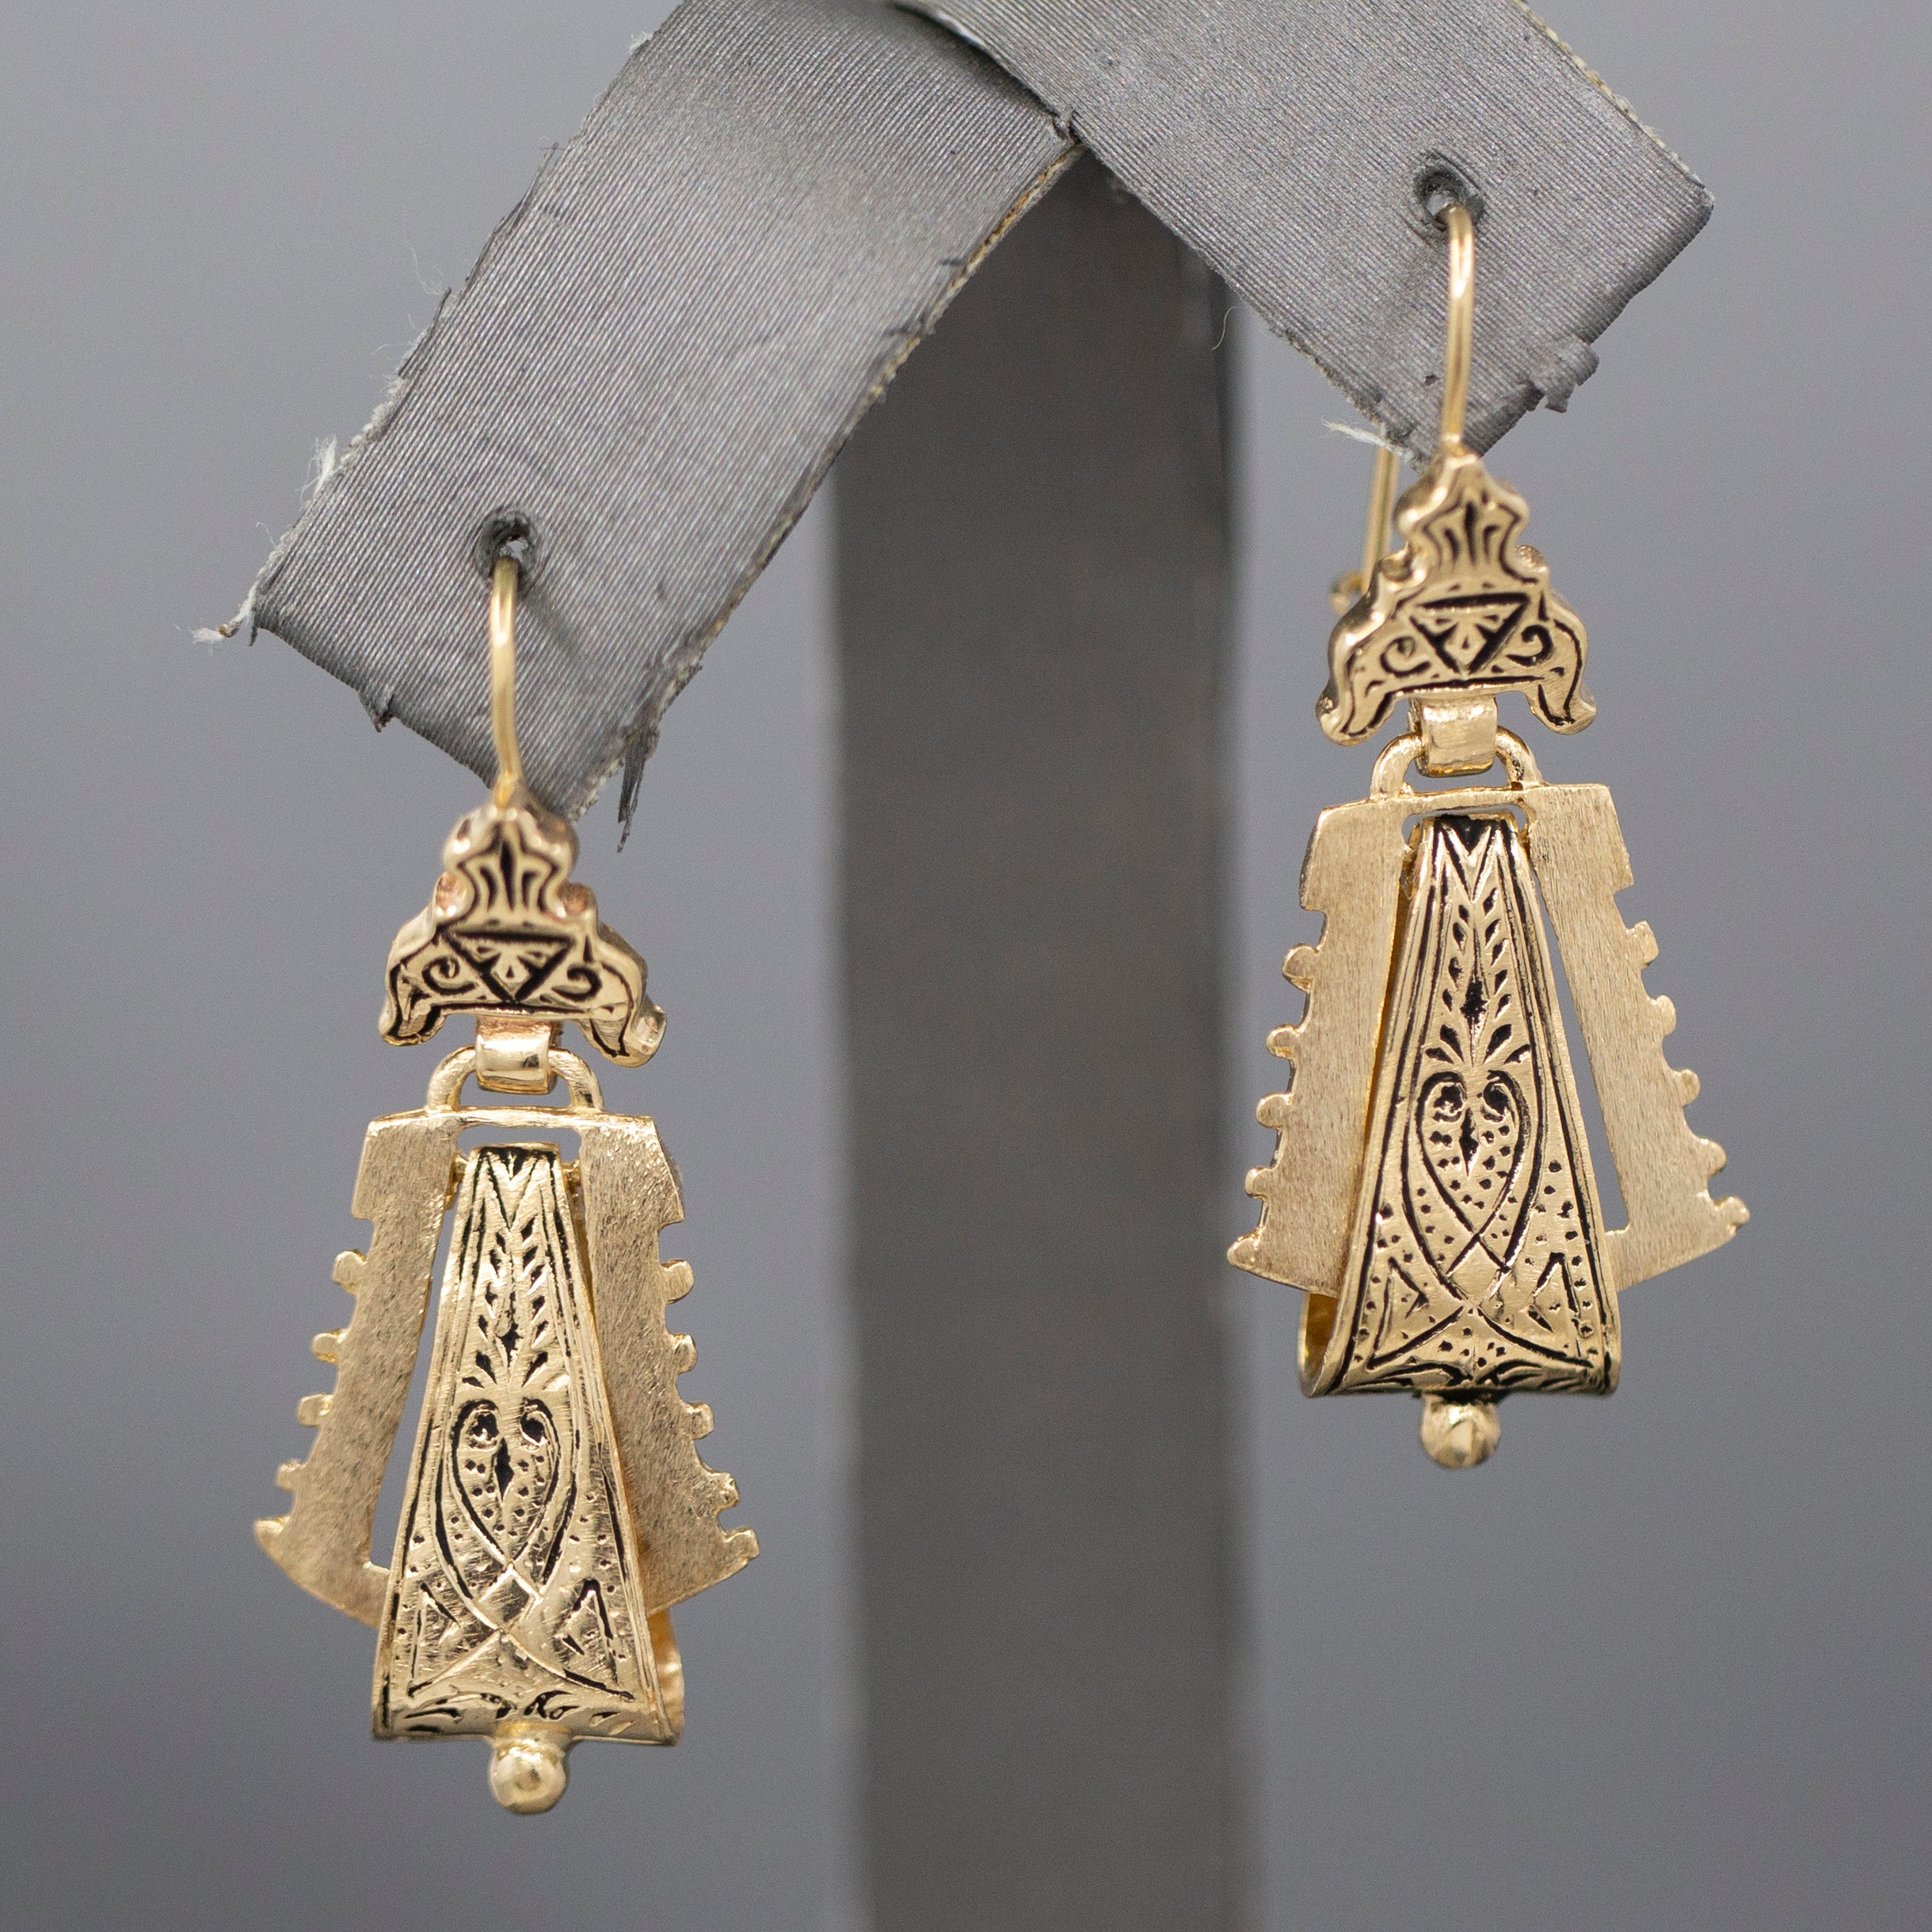 Antique Victorian Architectural Dangle Earrings in 14k Yellow Gold